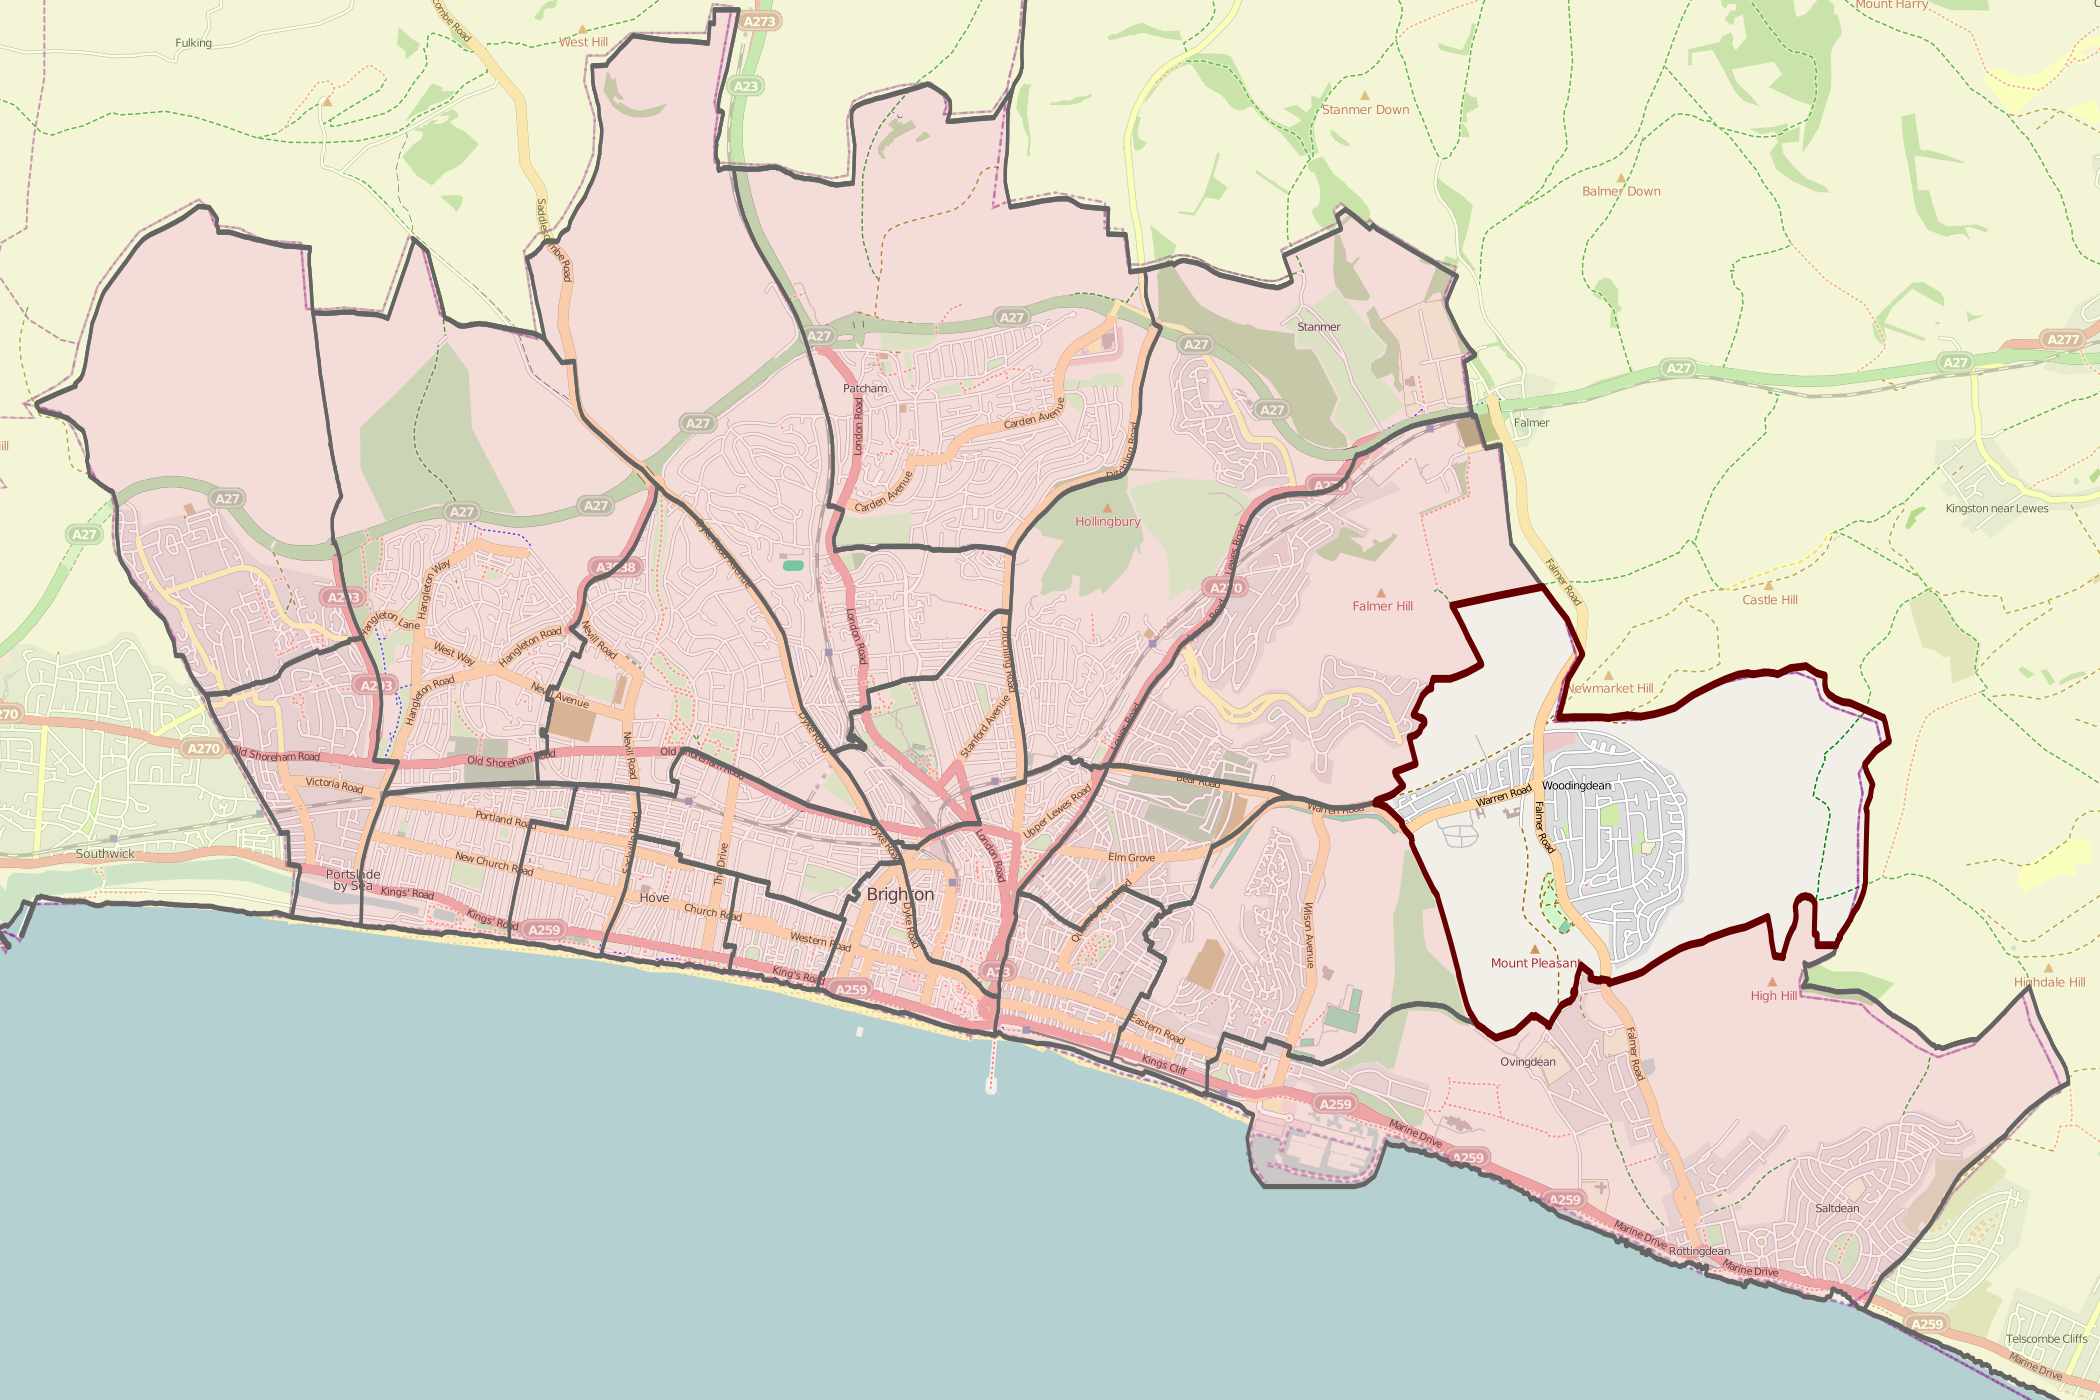 Brighton and Hove City Council election, 2011